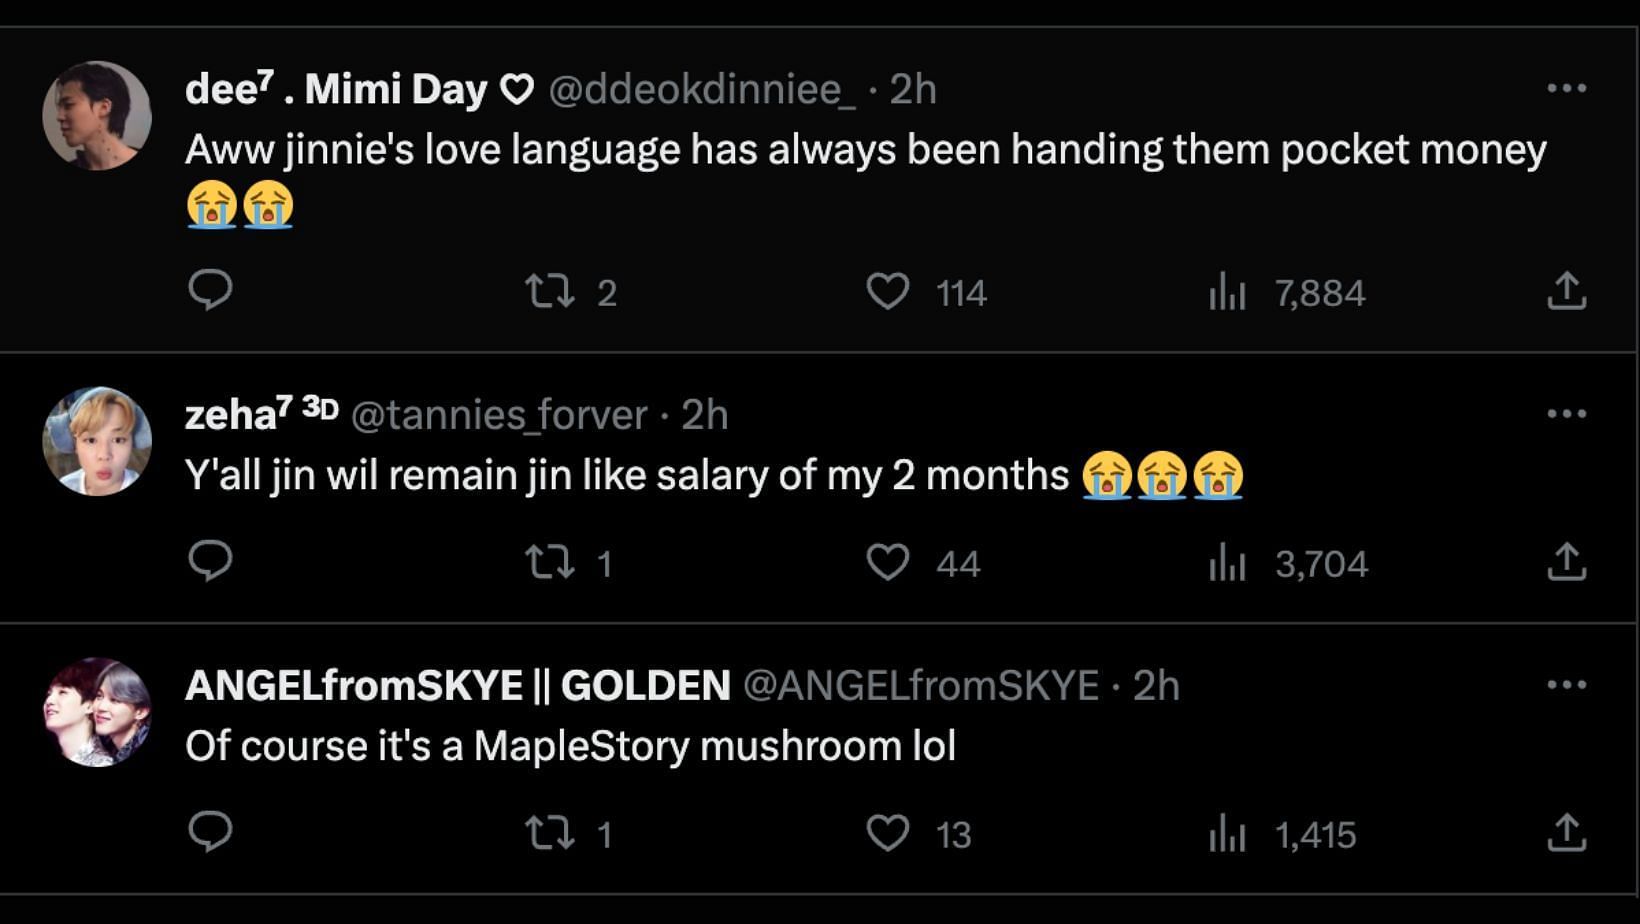 Fans react to Jin&#039;s birthday present to his younger team member. (Image via X/@ddeokdinniee_, @ANGELfromSKYE, @tannies_forver &middot;)